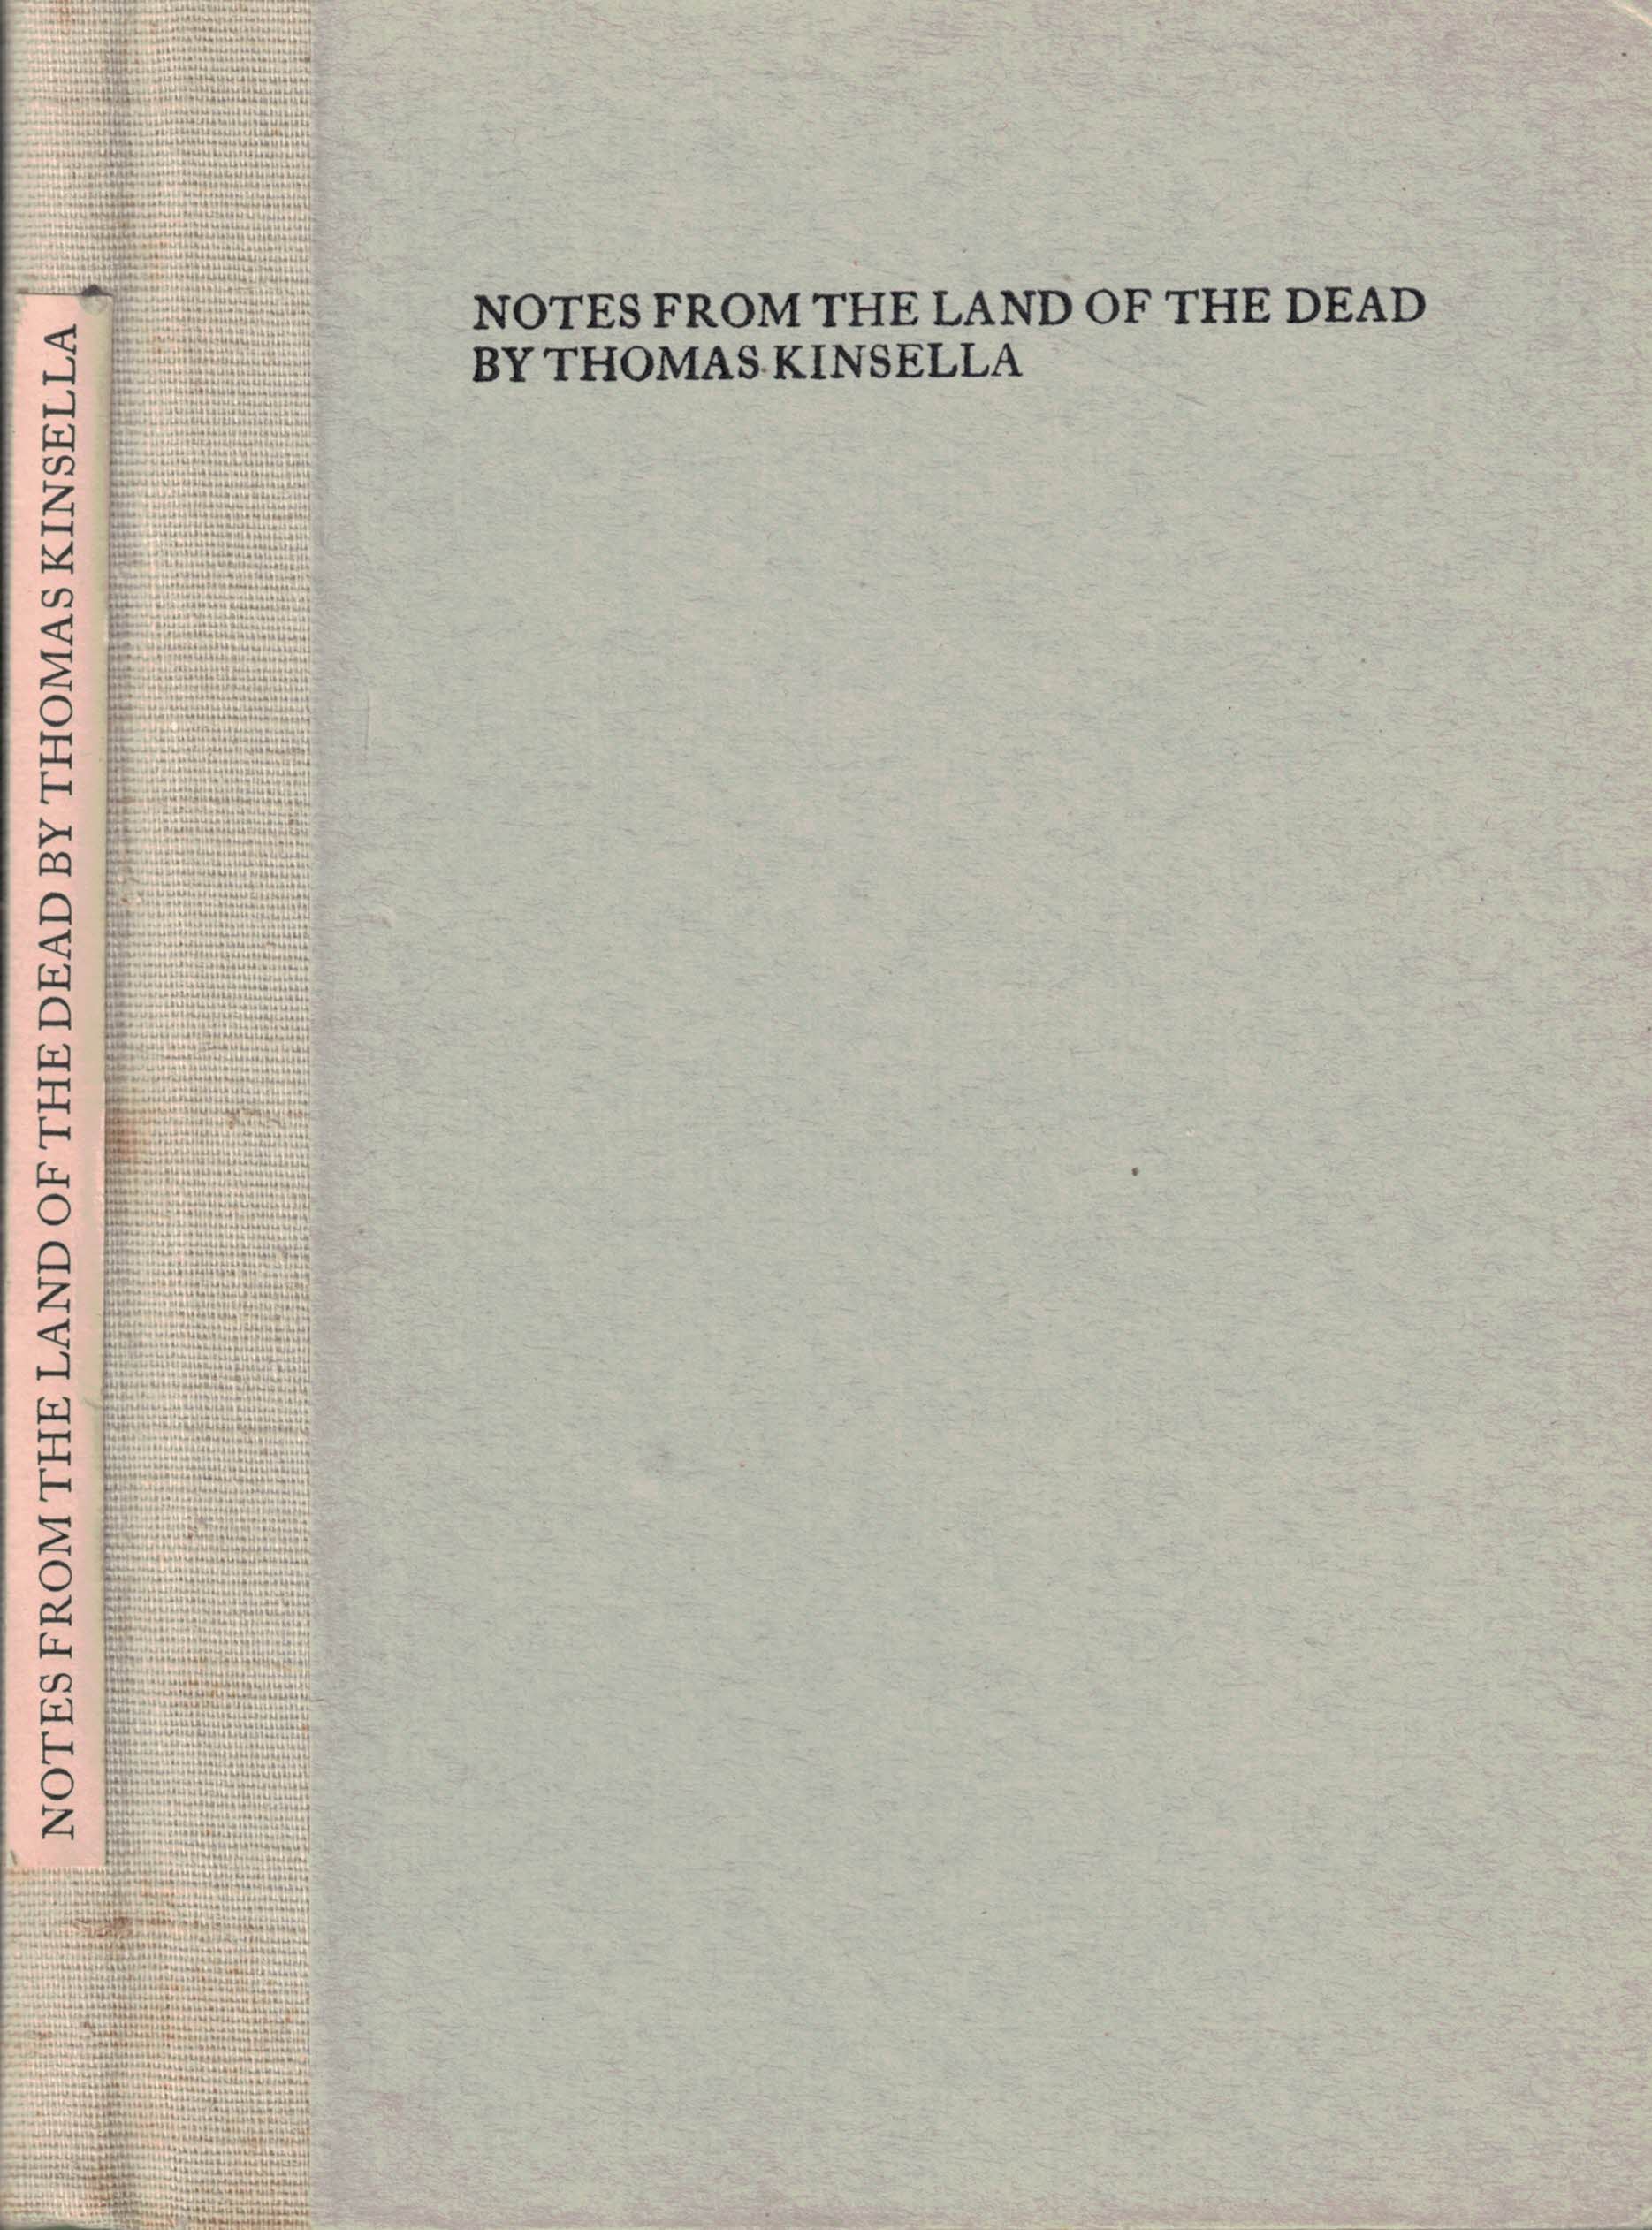 Notes from the Land of the Dead. Limited Edition. Cuala Press.